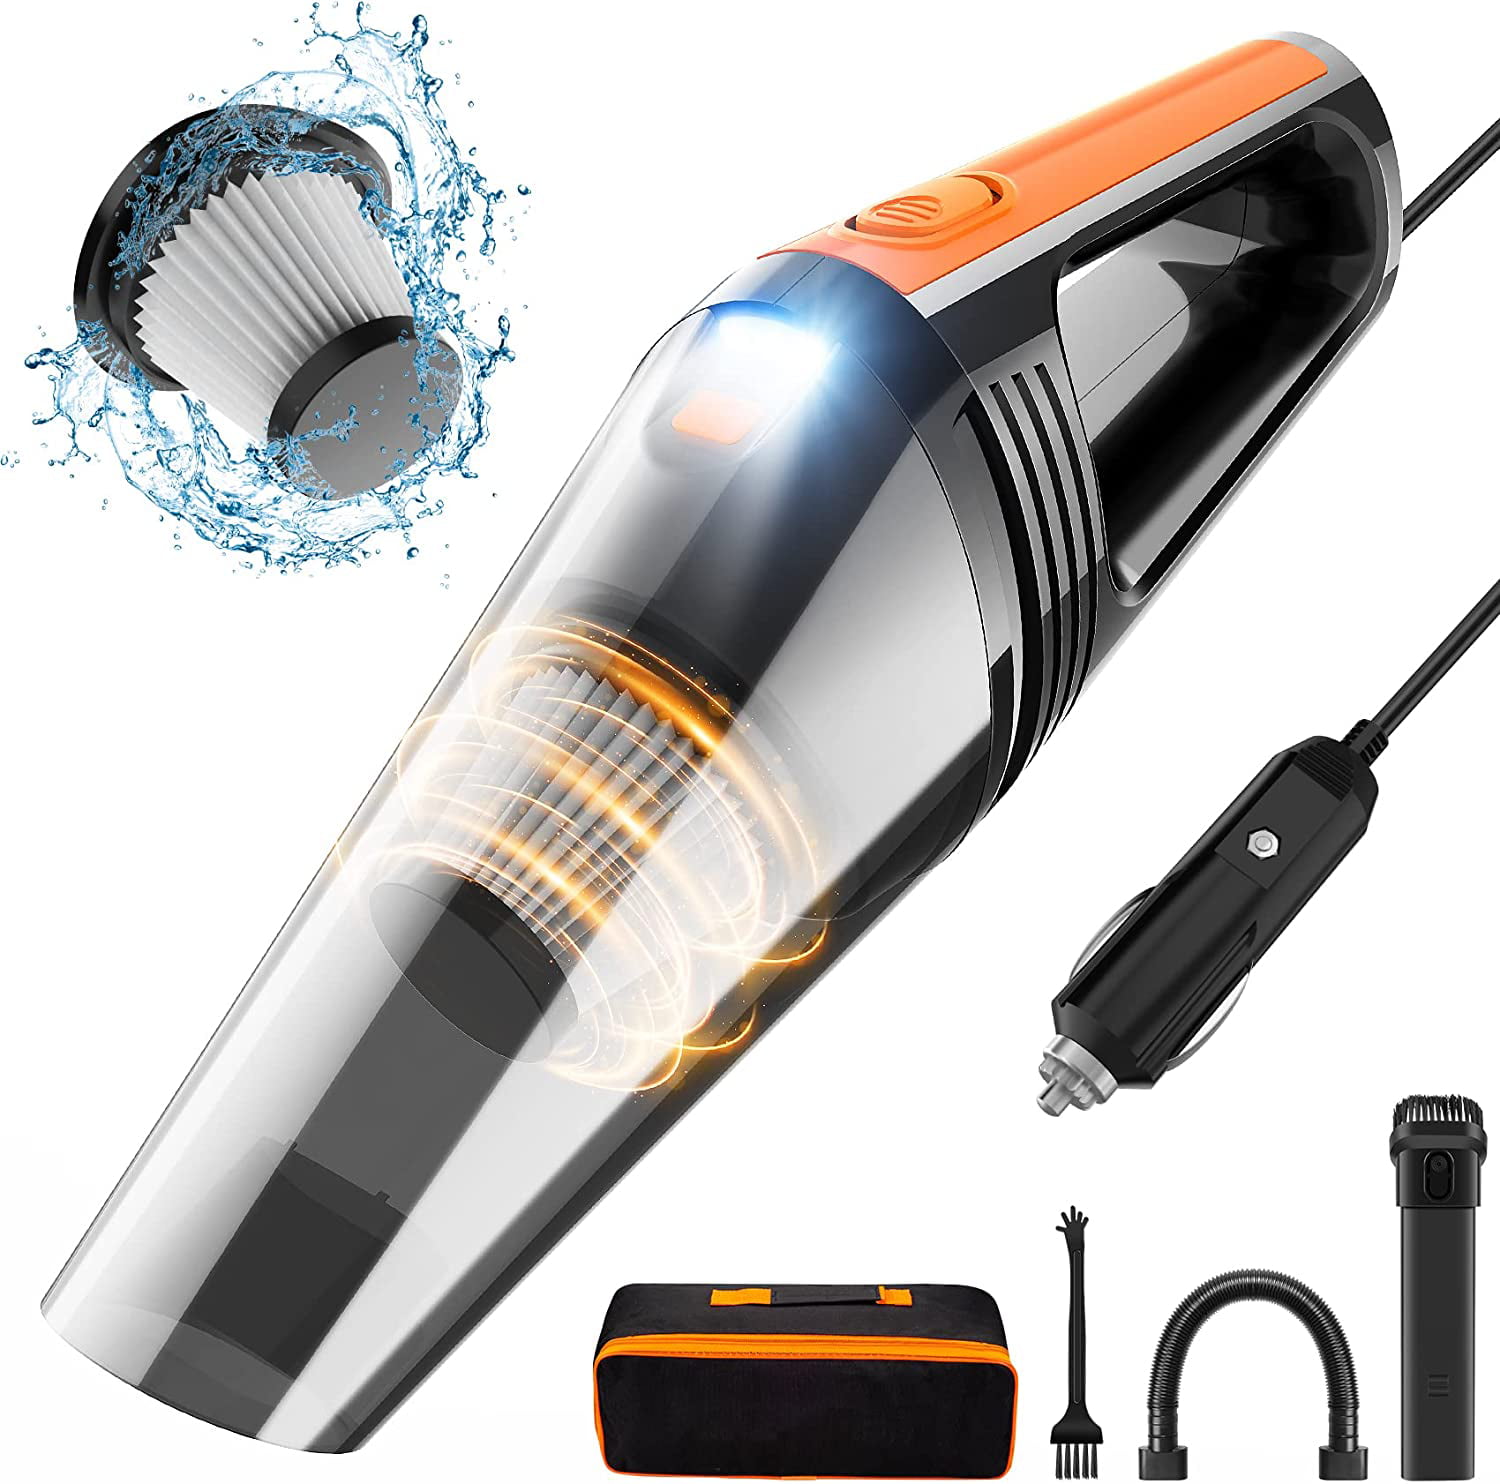 Car & Auto Accessories Kit for Cleaning Car Interior 5000PA Corded Handheld Vacuum 16.4 Foot Cable Wet and Dry Auto Dust Buster Vacuum Cleaner Car Vacuum Cleaner 100W Portable Car Vacuum Cleaner 